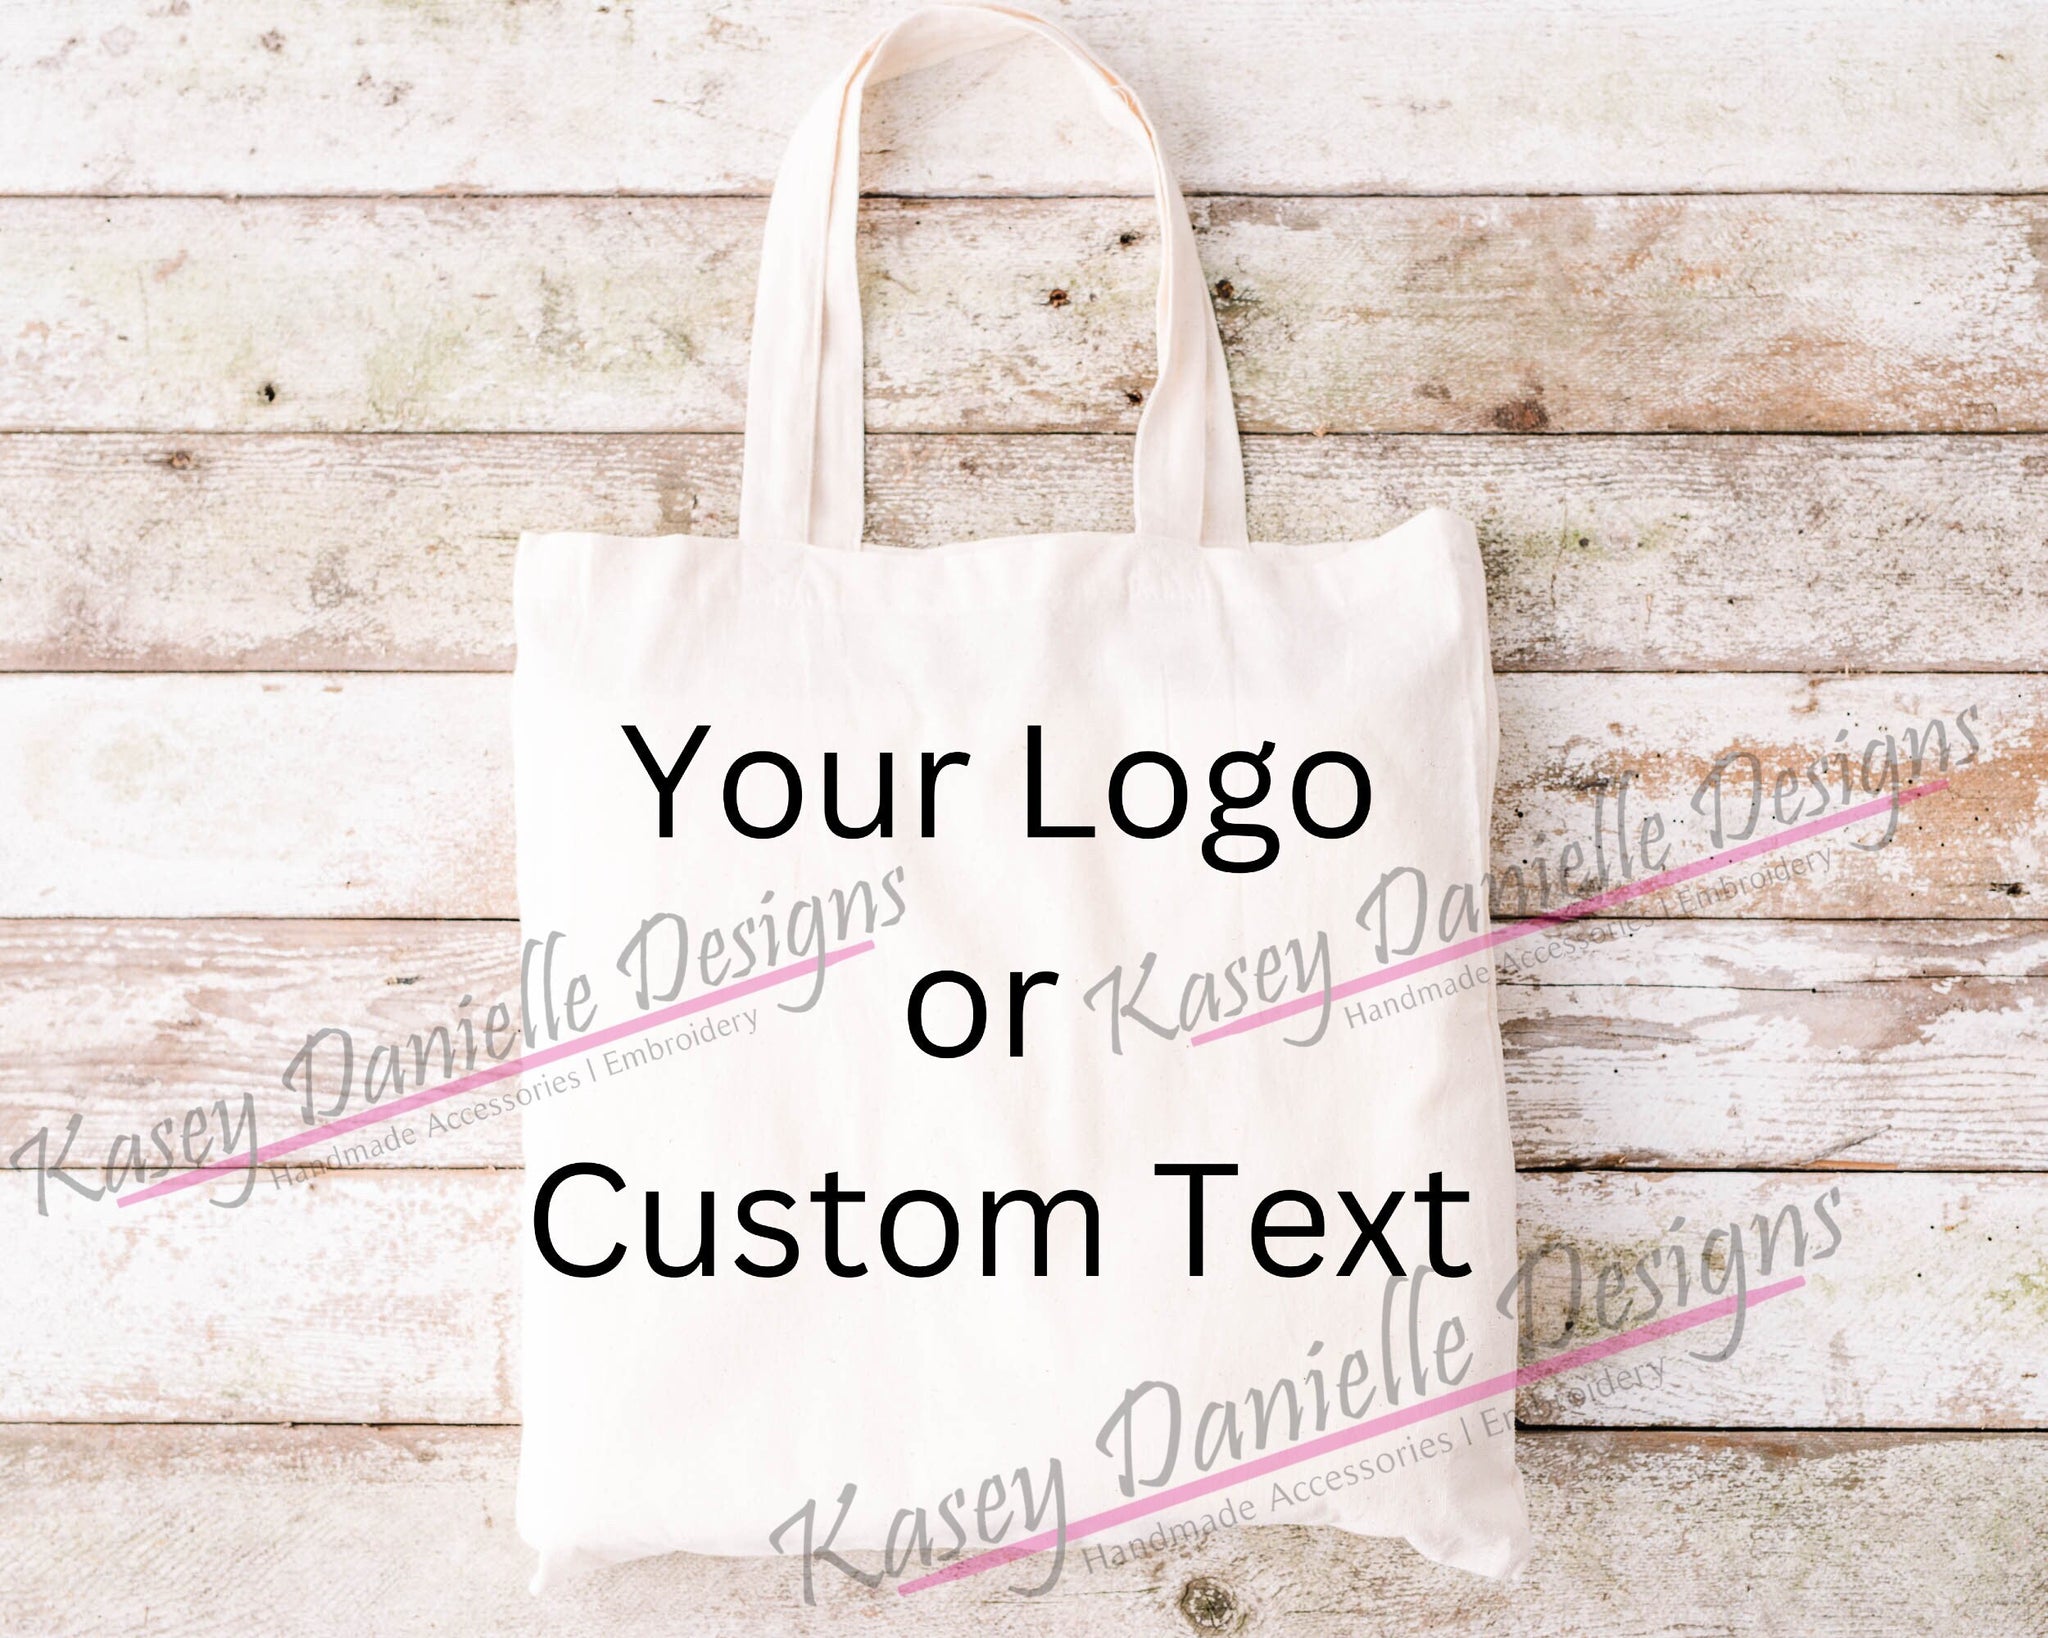 Discount Tote Bags for Trade Shows